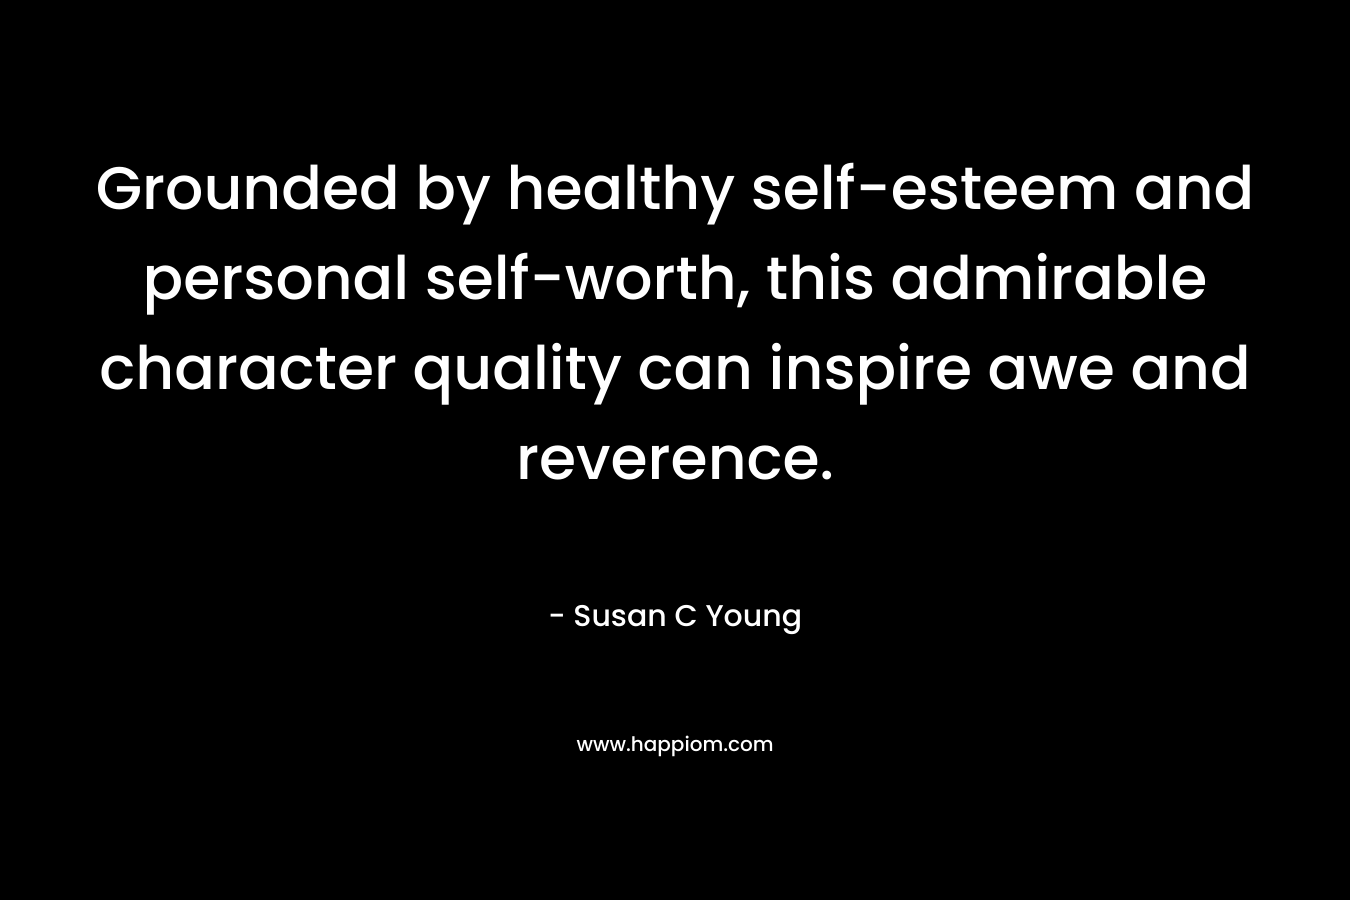 Grounded by healthy self-esteem and personal self-worth, this admirable character quality can inspire awe and reverence. – Susan C Young